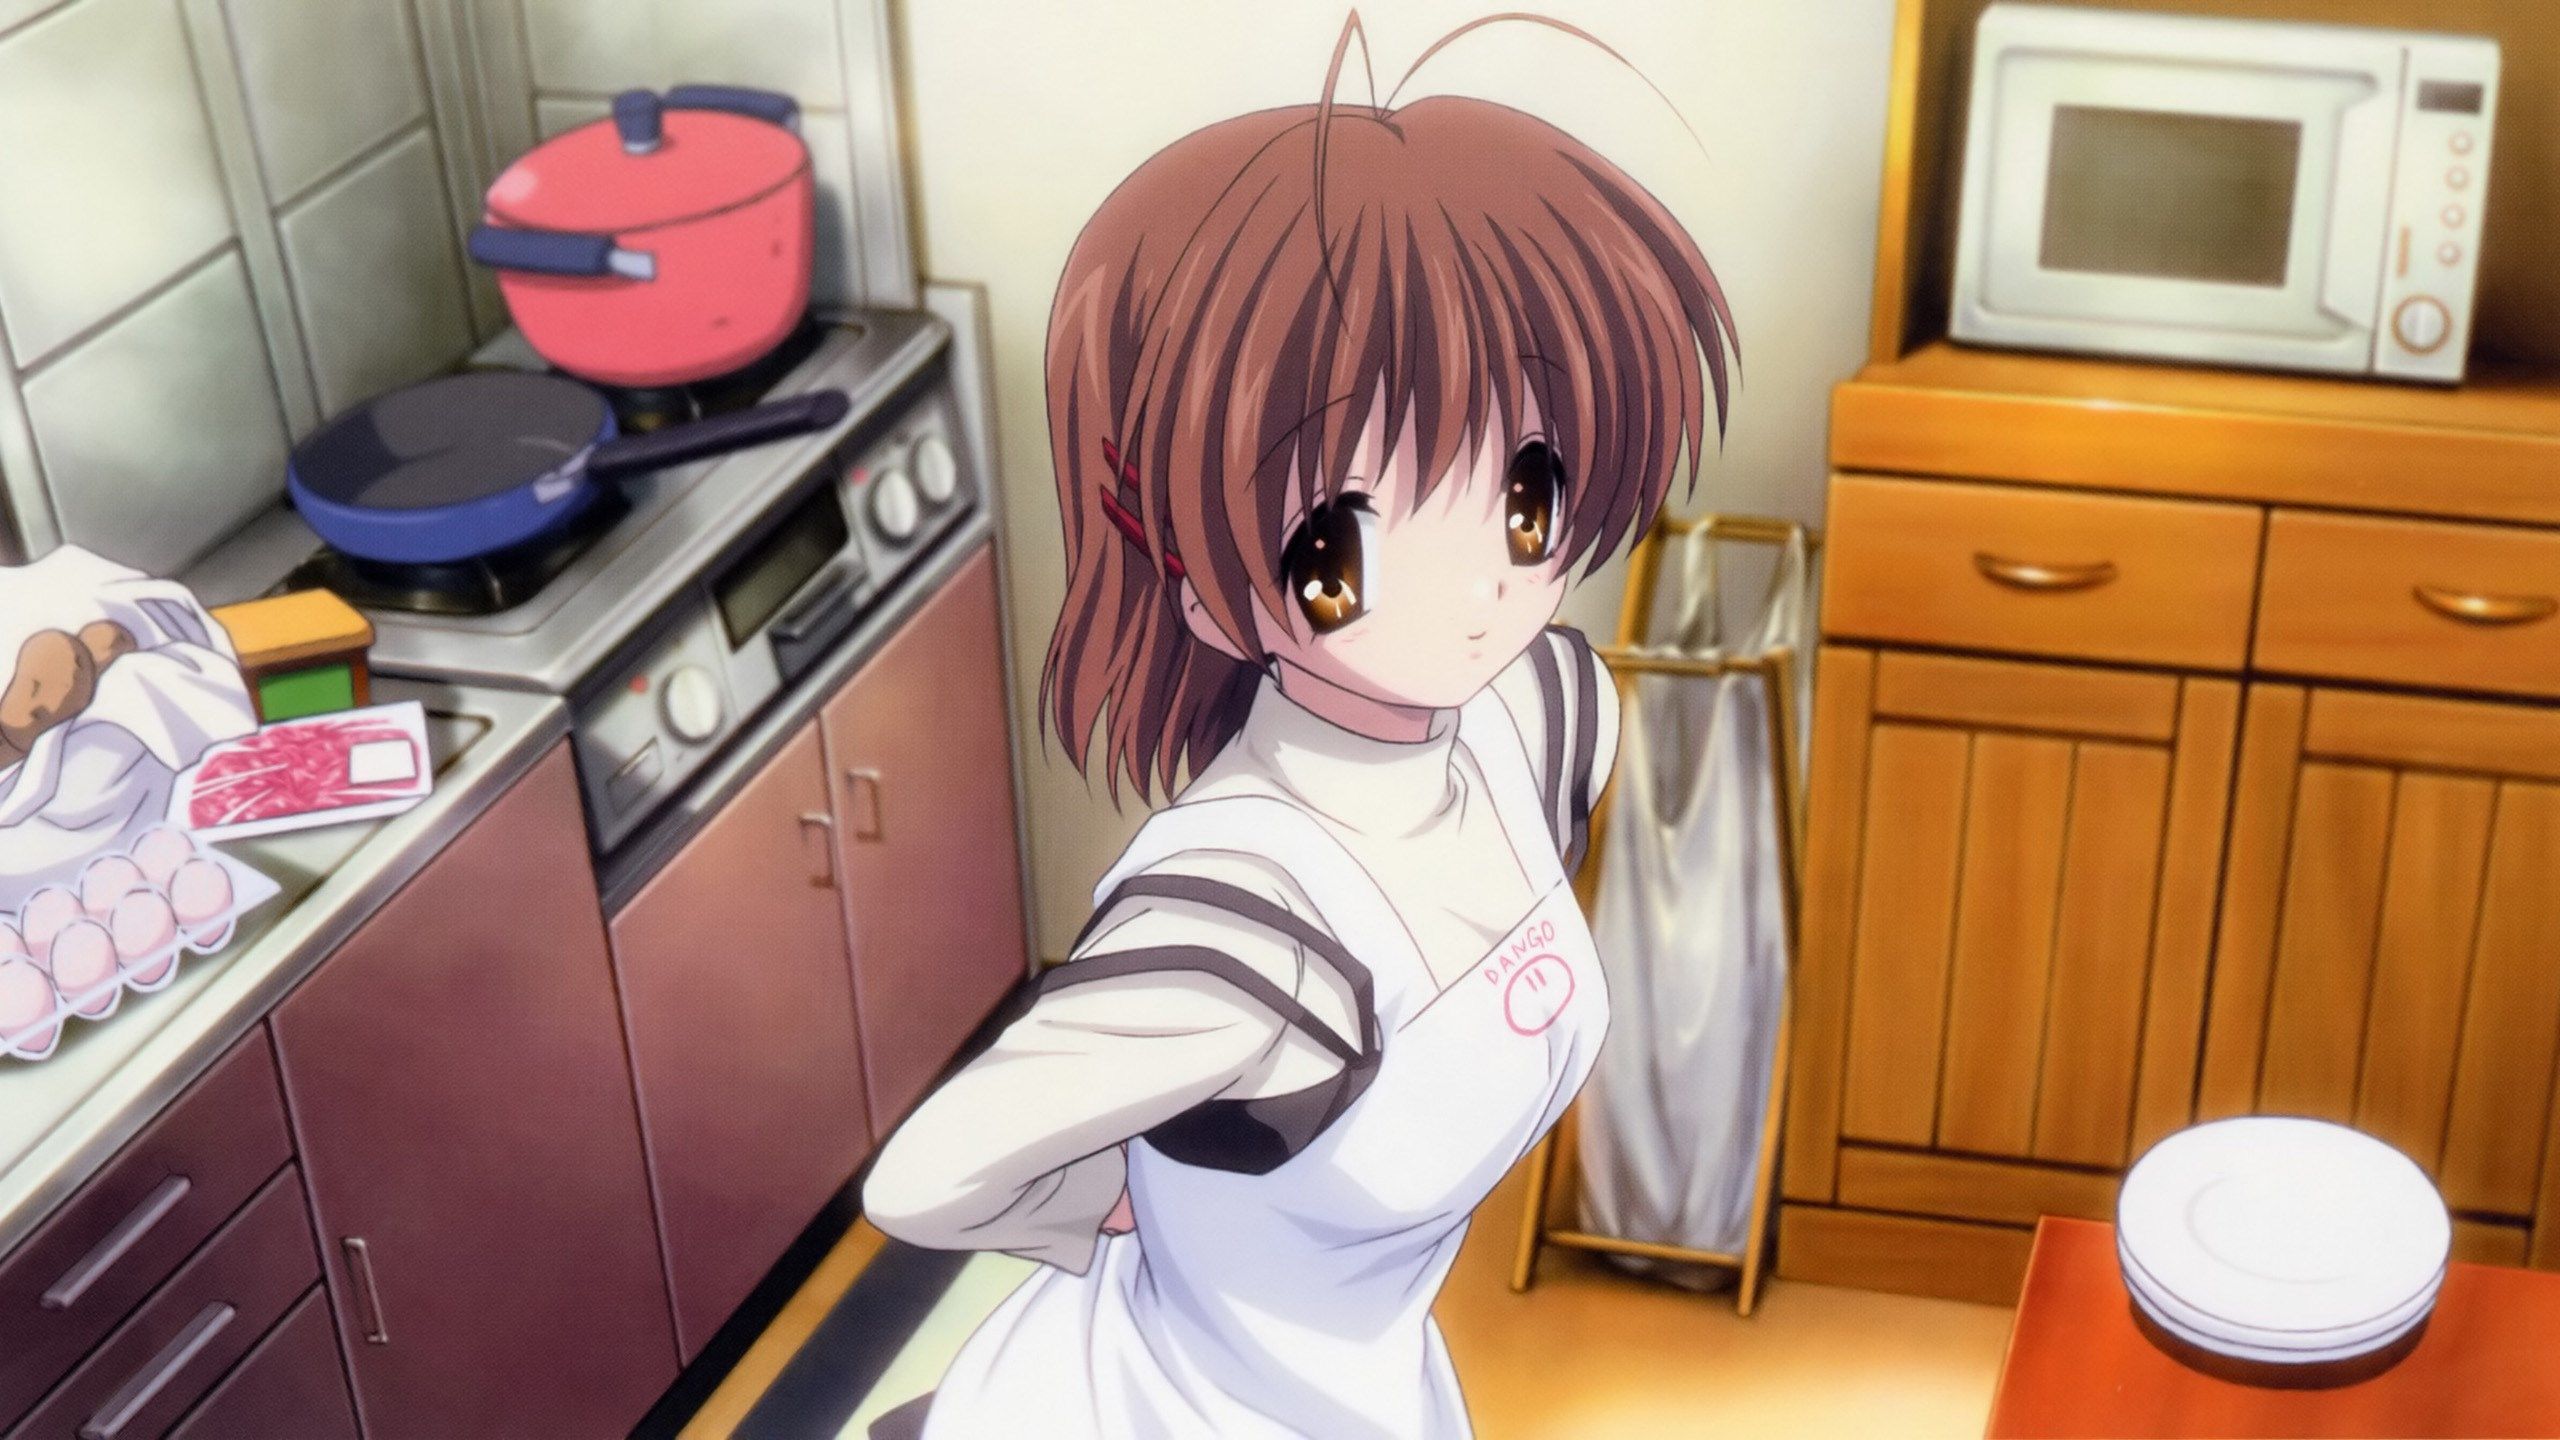 free screensaver wallpaper for clannad. Clannad, Clannad anime, Anime